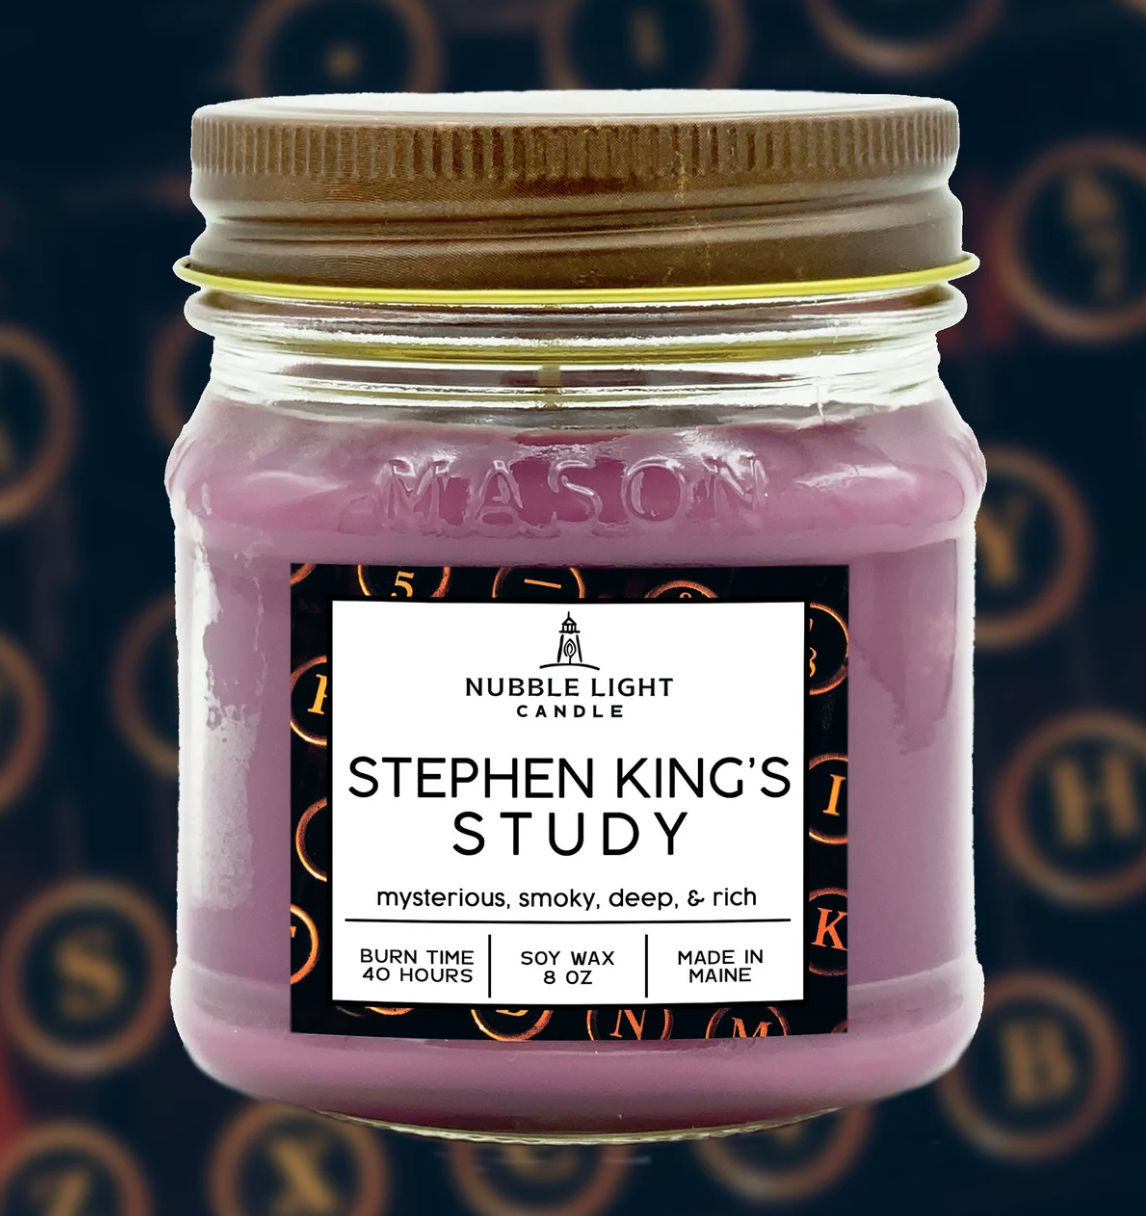 Purple candle that says Stephen King's Study